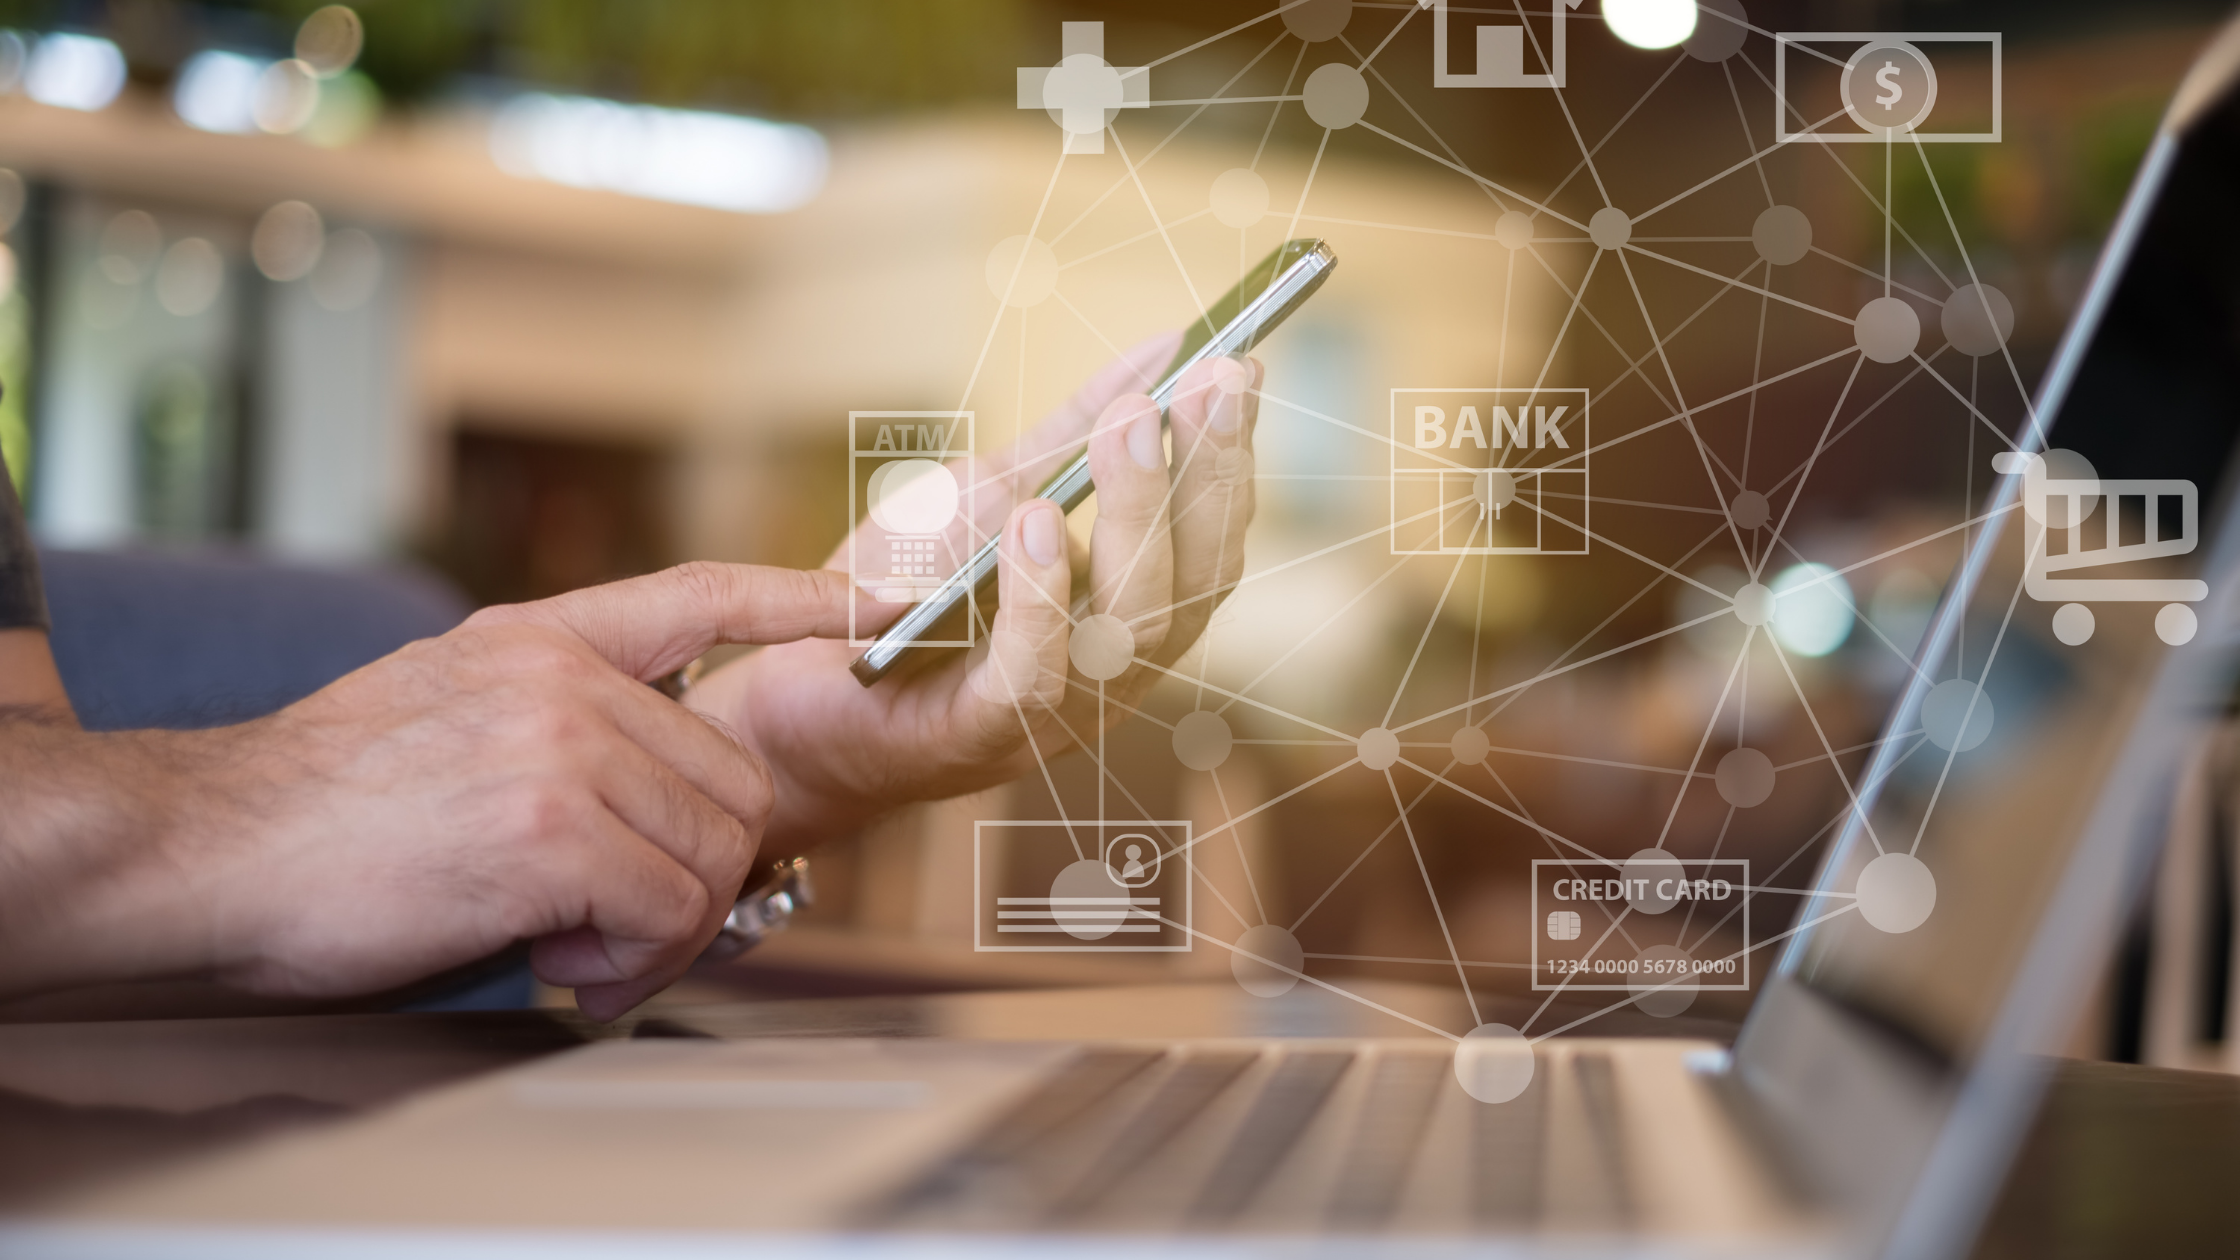 Five Basic Yet Helpful Features Of Mobile Banking